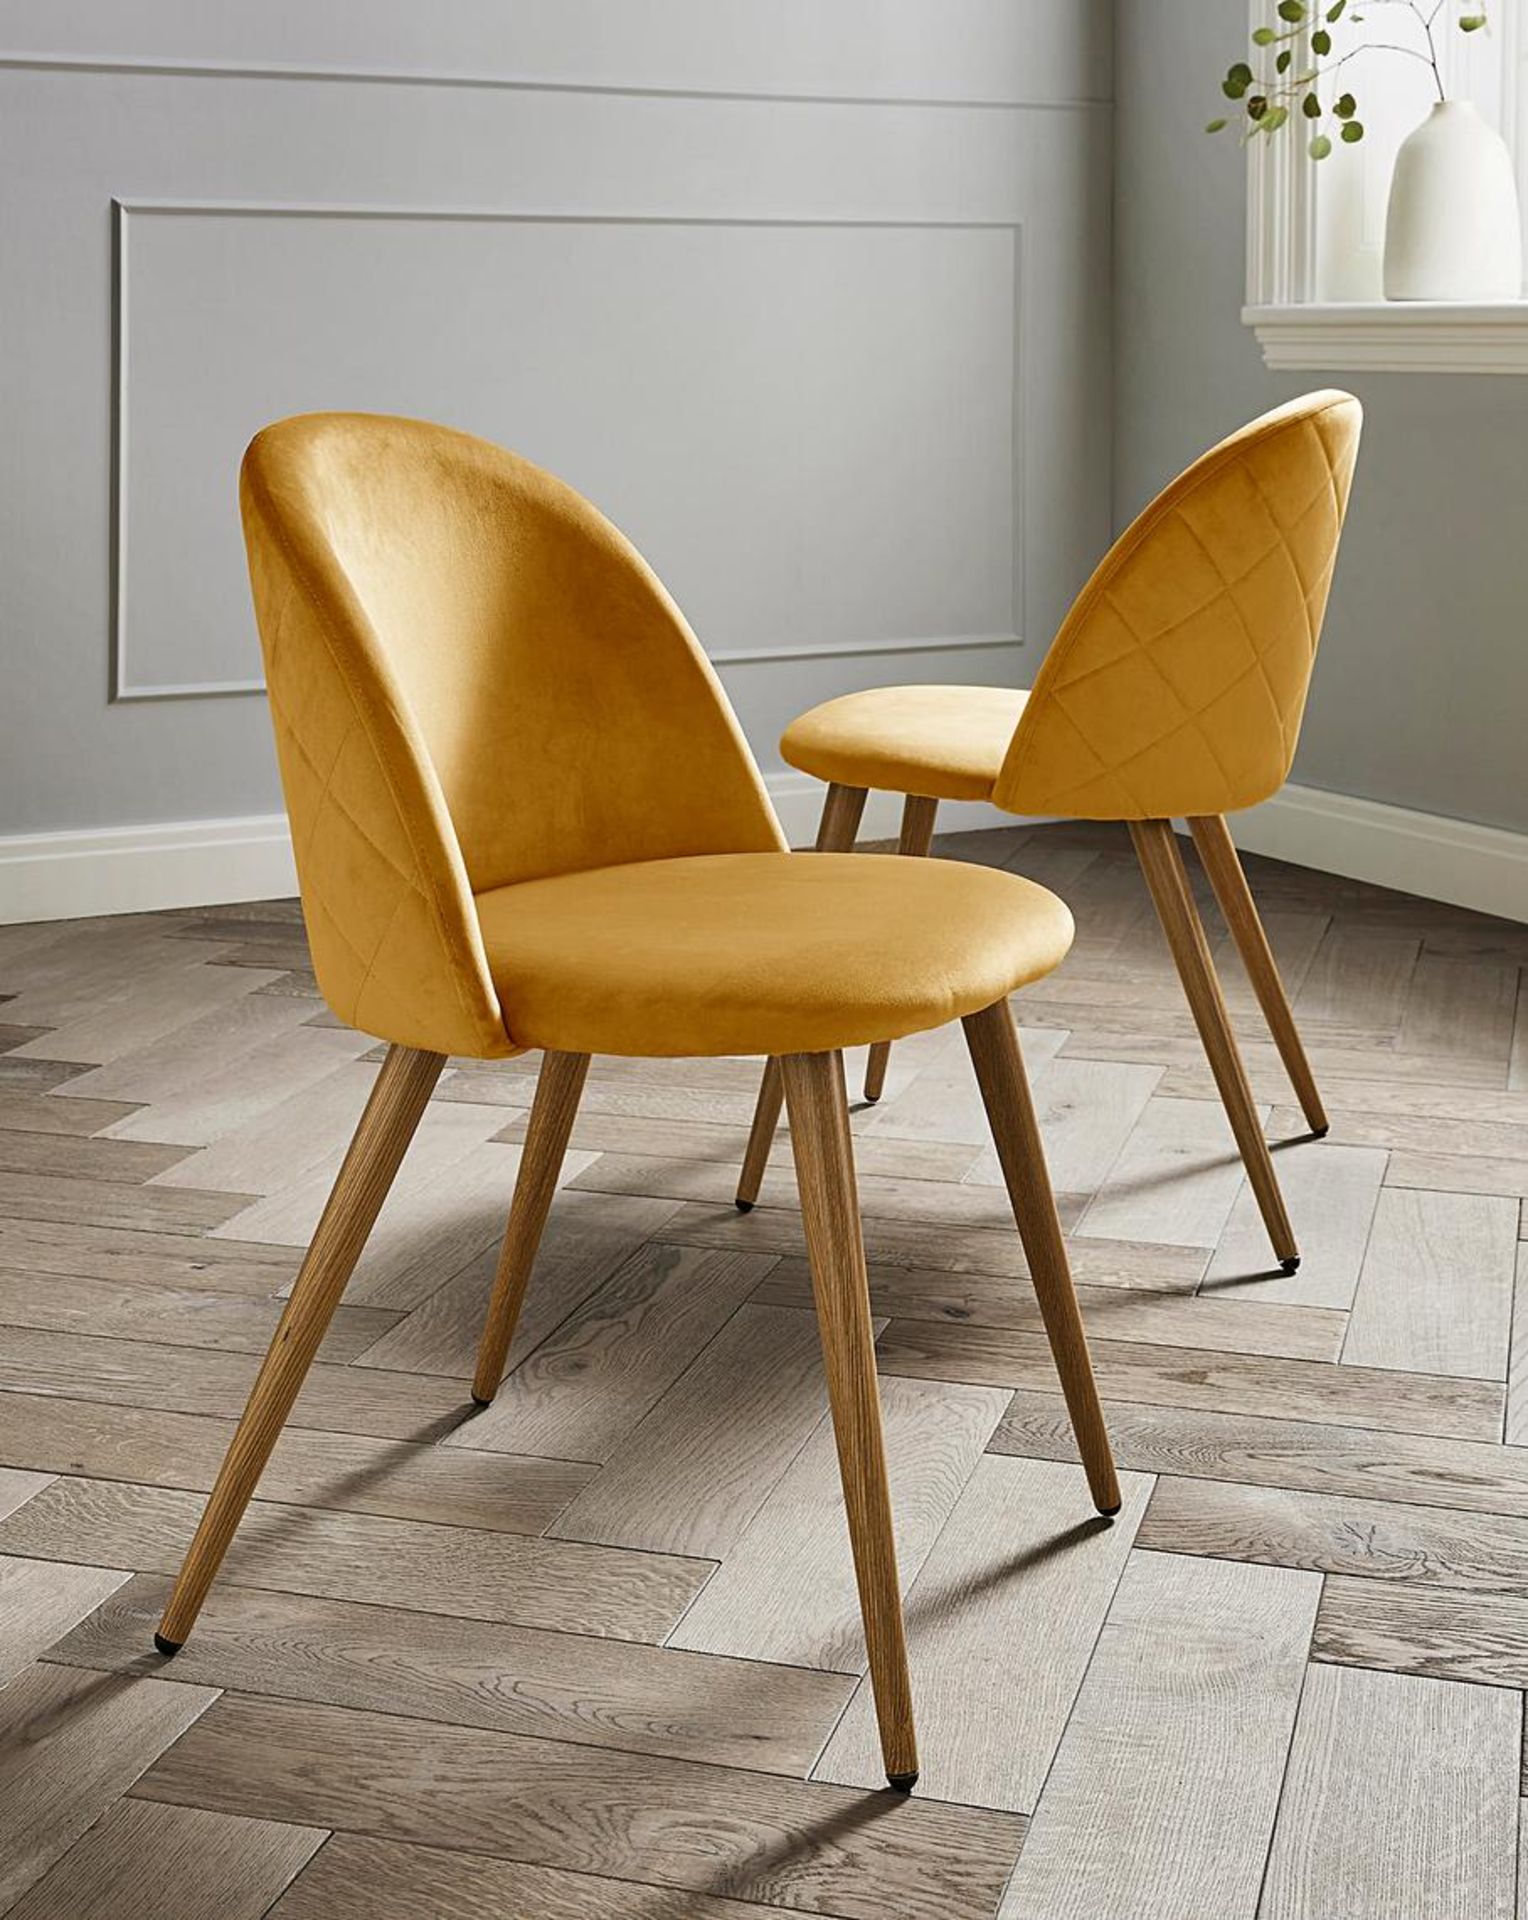 Pair of Klara Dining Chairs. RRP £209.00. The Klara Dining Chairs are the perfect style statement